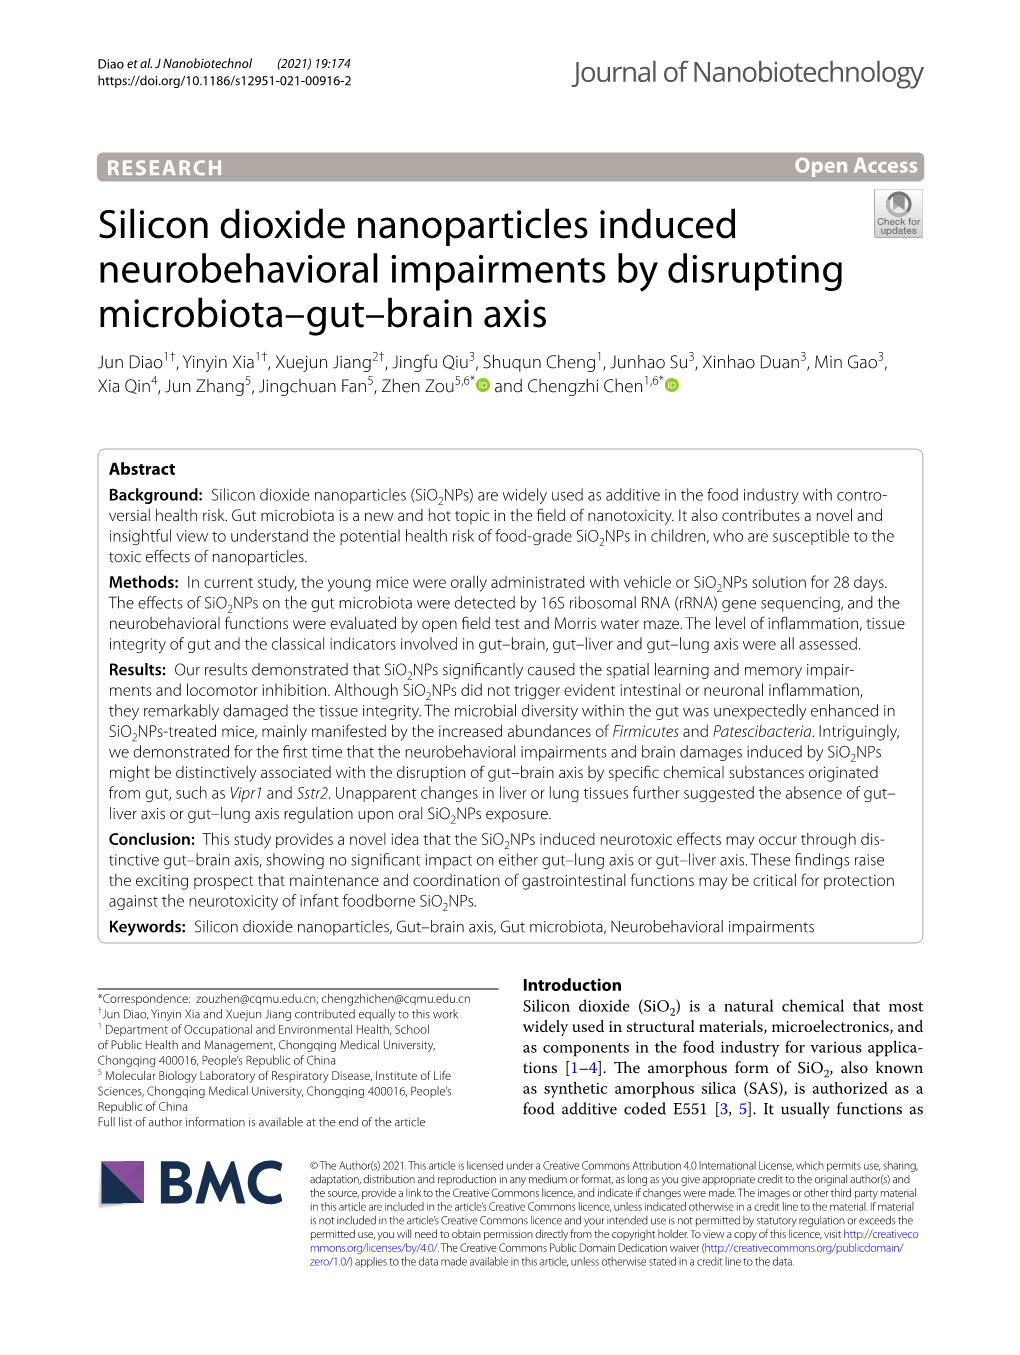 Silicon Dioxide Nanoparticles Induced Neurobehavioral Impairments By